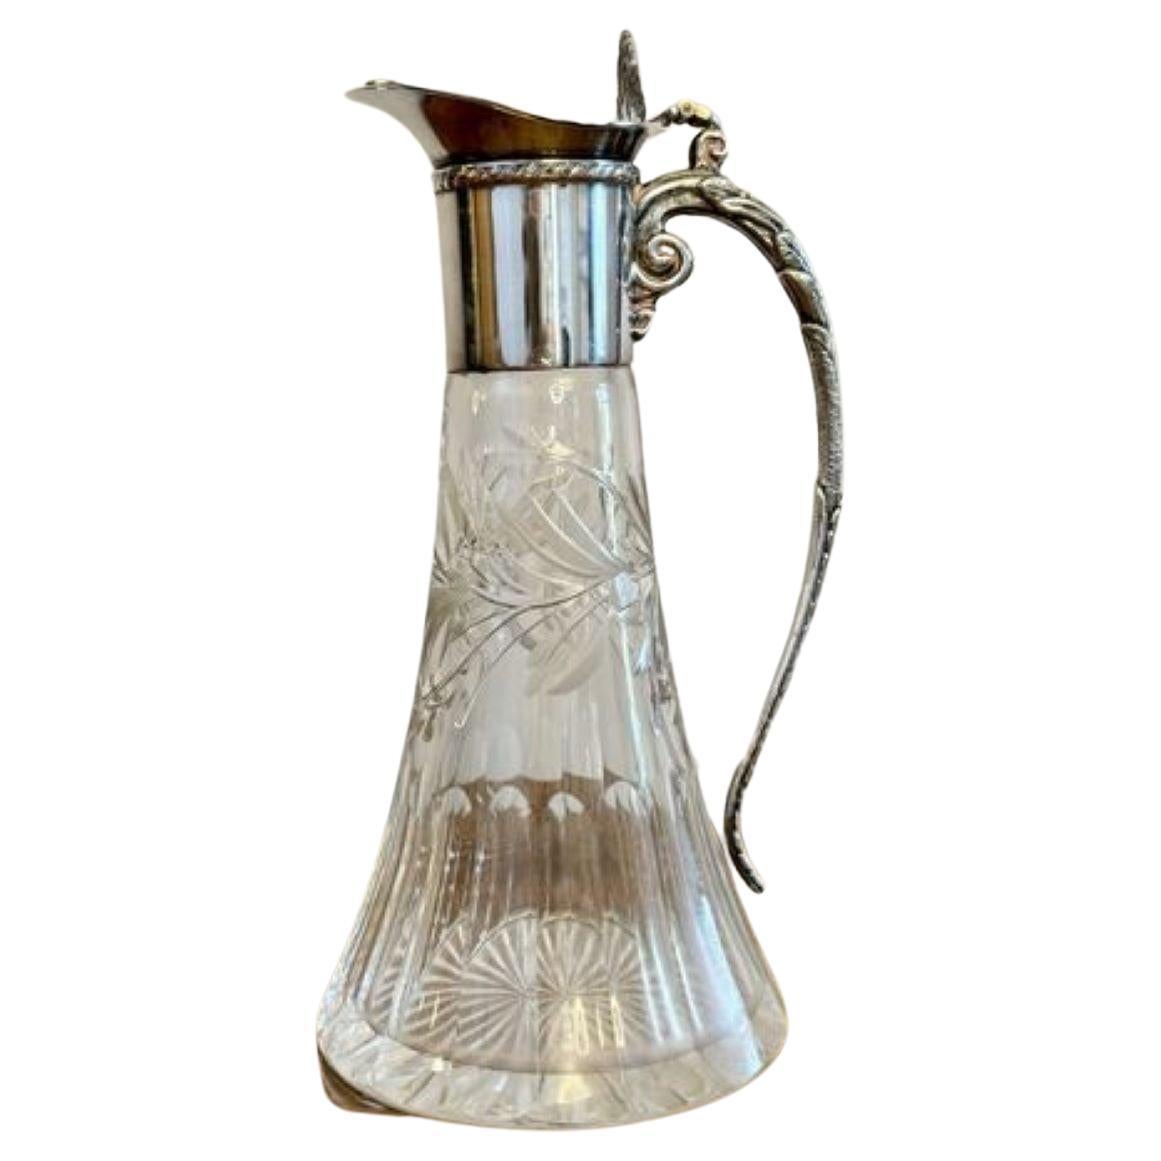 Outstanding quality antique Victorian silver plated claret jug 